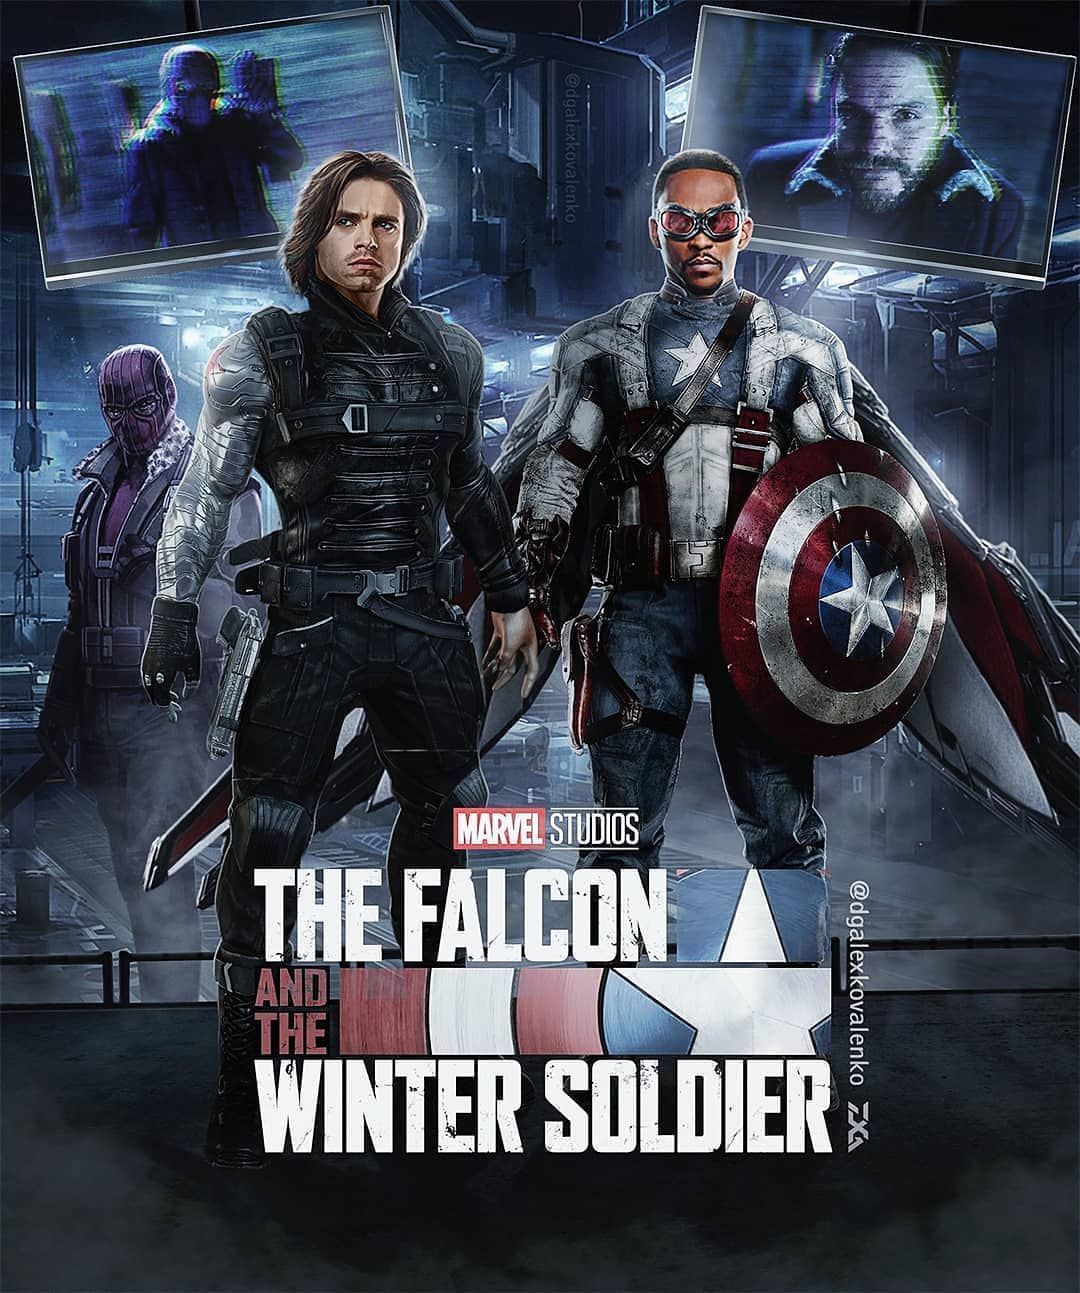 ▪️The Falcon & And The Winter Soldier. ▪️vs. Baron Zemo. ▪️Rate art from 1 to 10 !